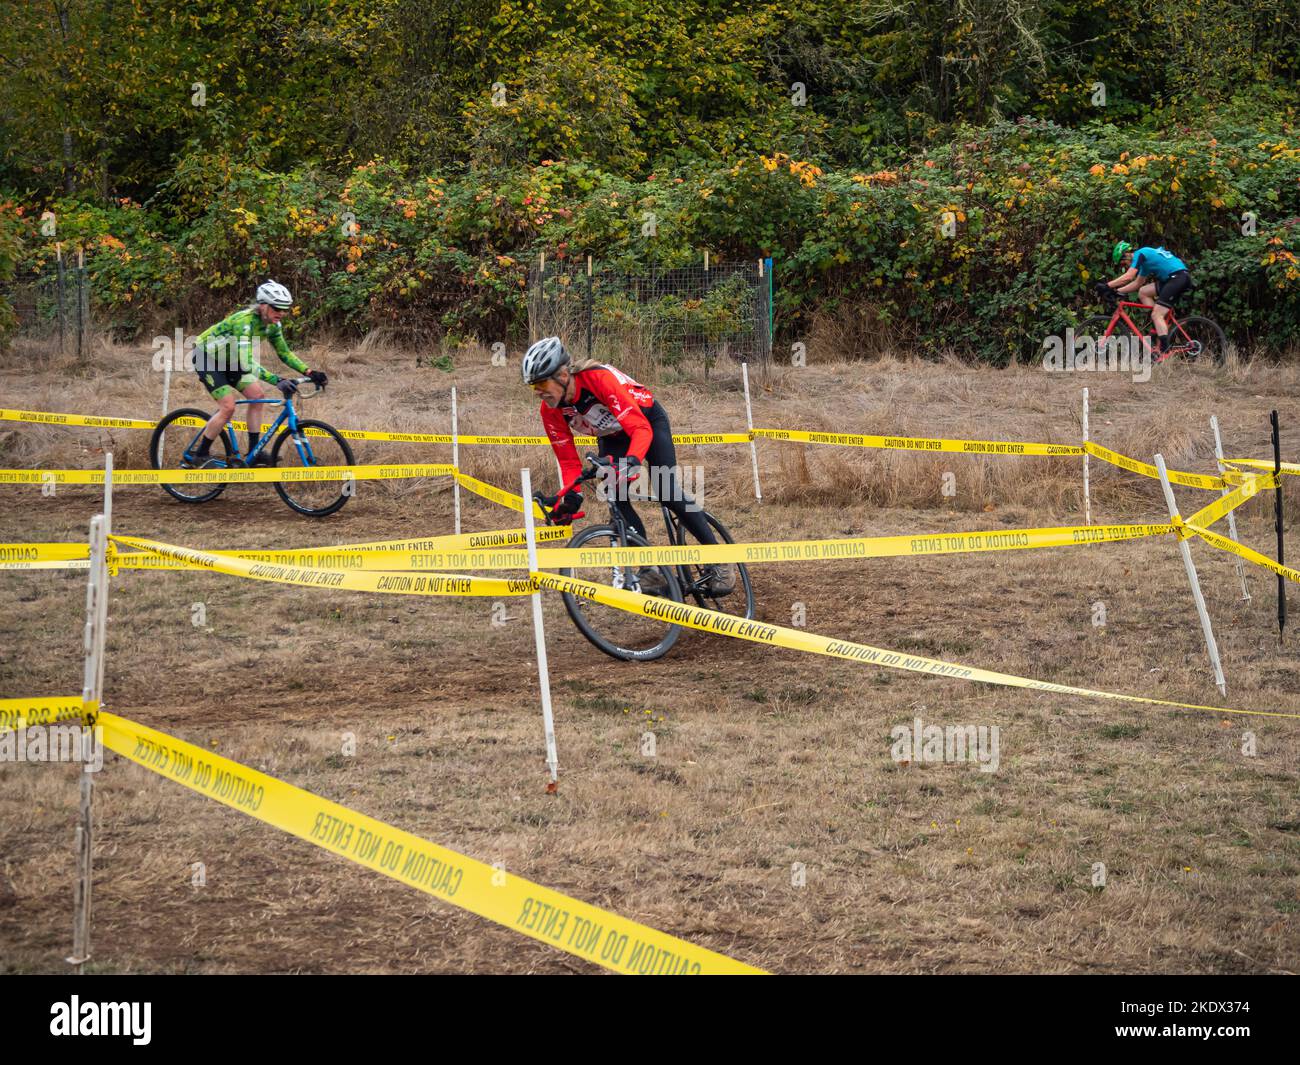 WA22744-00...WASHINGTON - Cyclocross racers coming through the S-curves at Cross Revolution cyclocross race at Fort Steilacoom Park in Lakewood. Stock Photo